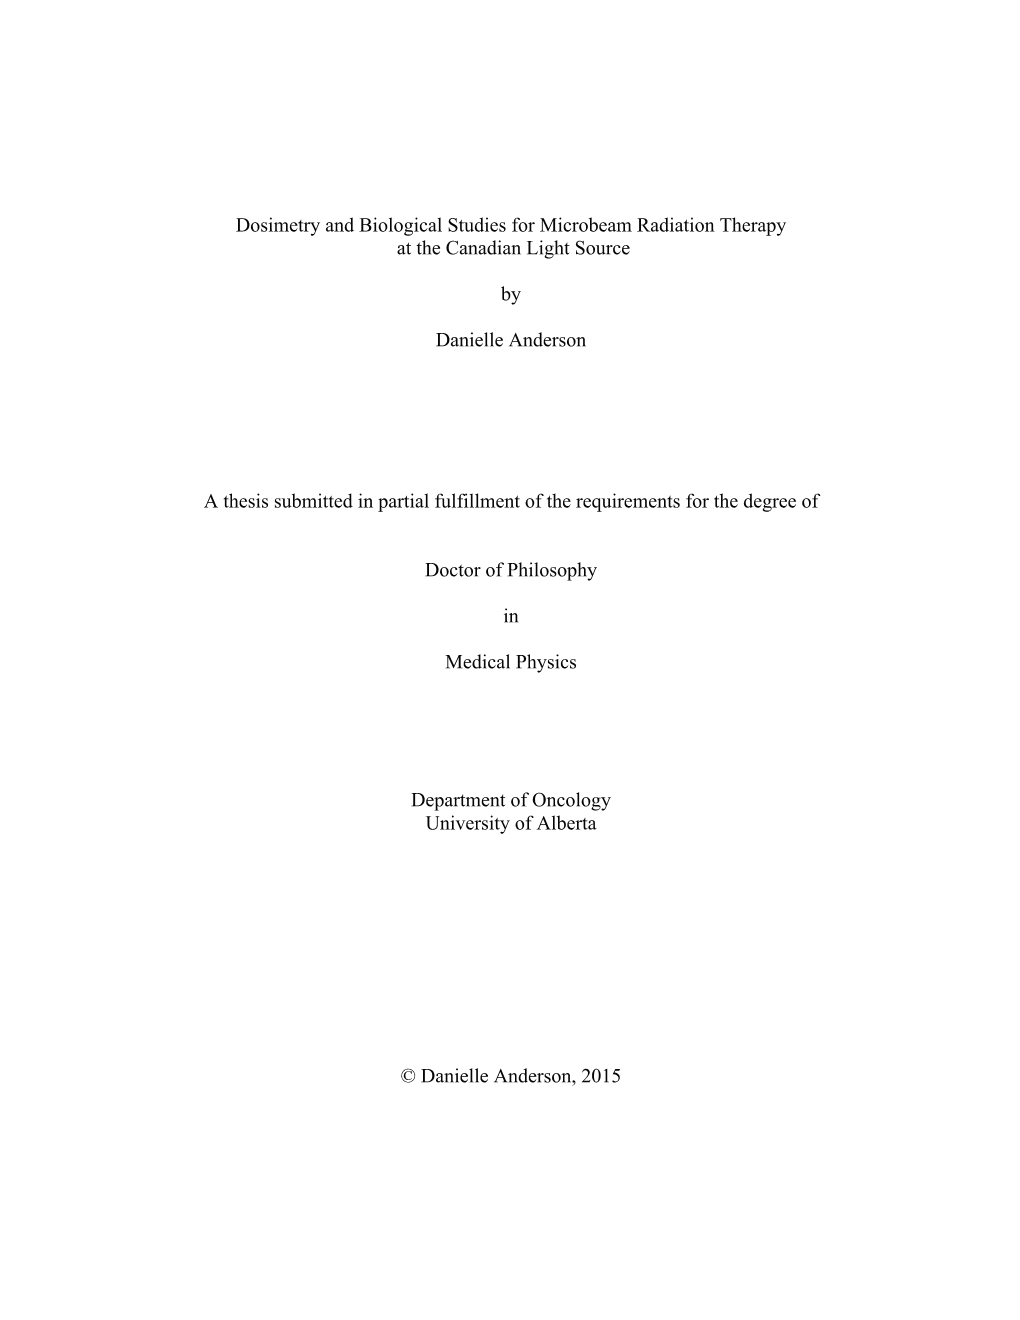 Dosimetry and Biological Studies for Microbeam Radiation Therapy at the Canadian Light Source by Danielle Anderson a Thesis Subm